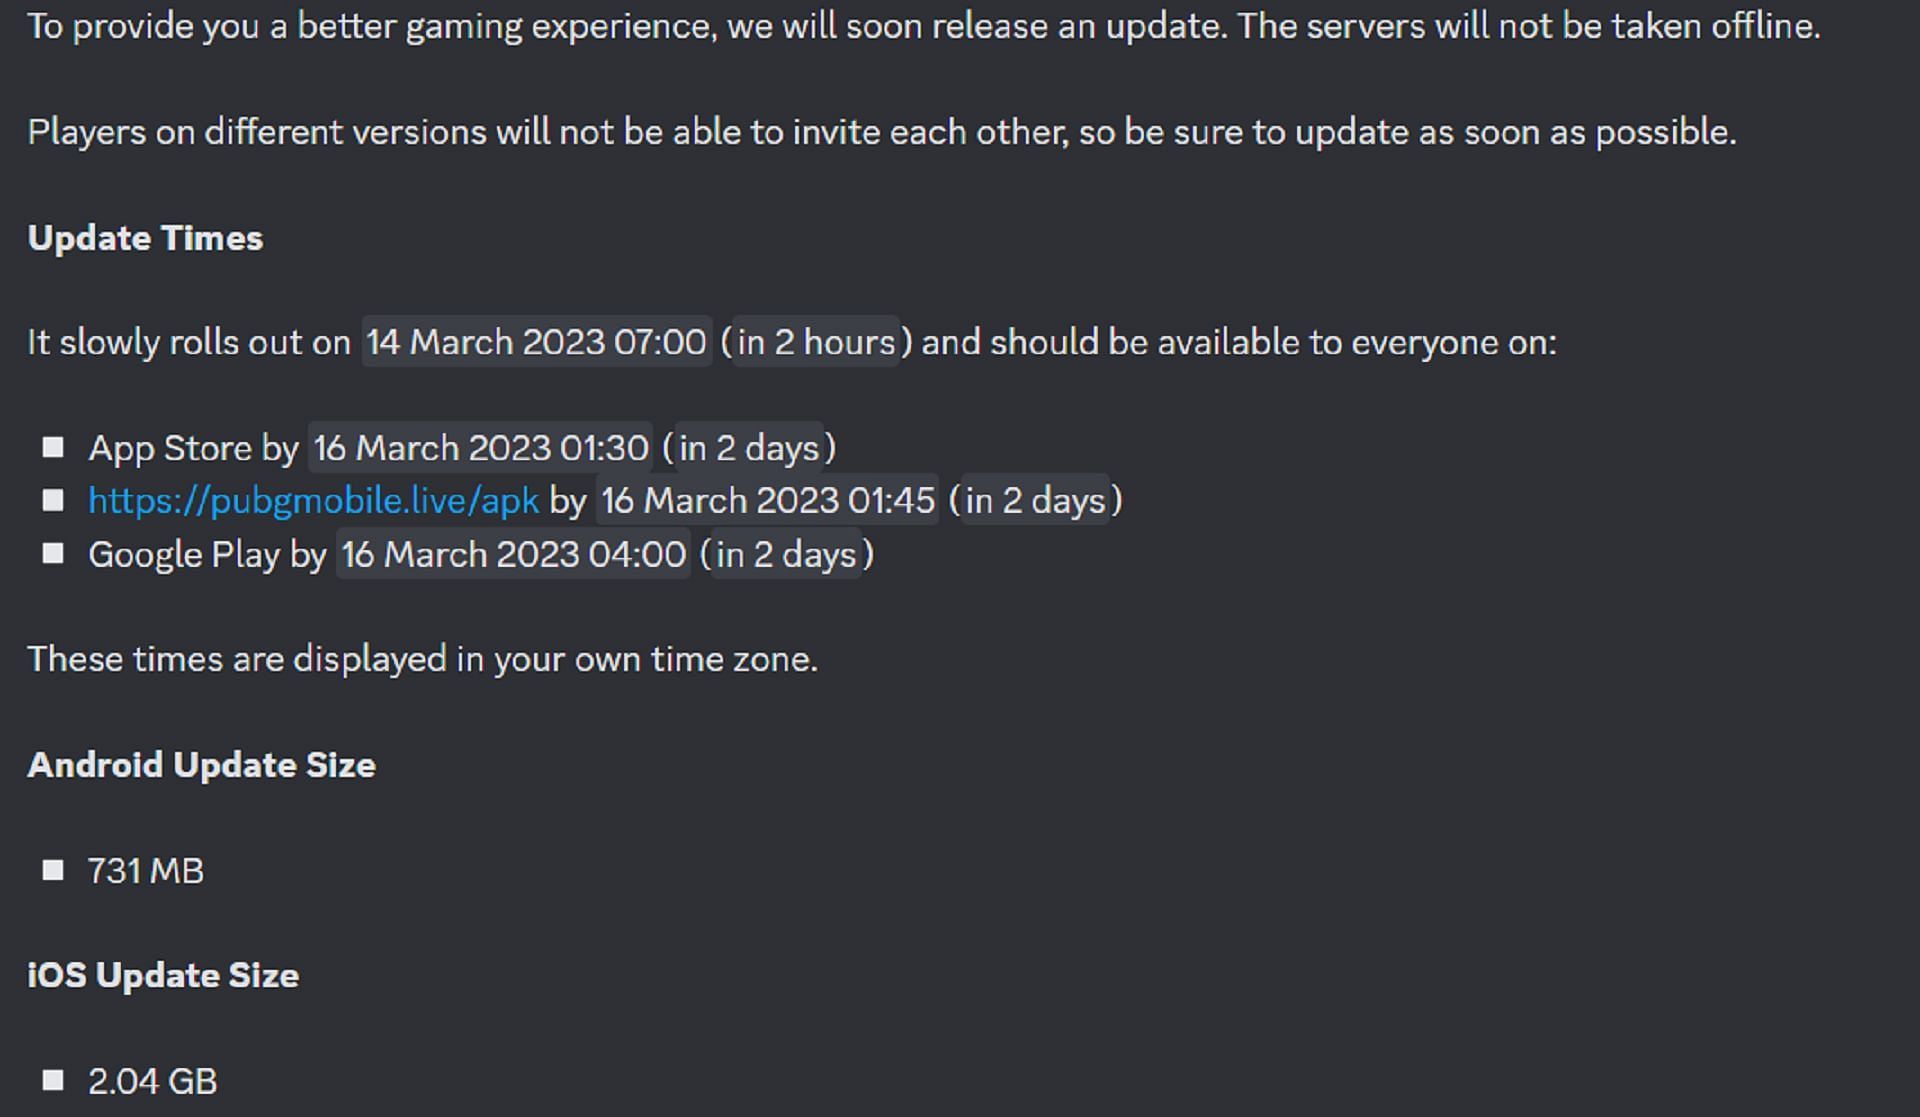 The update schedule for the update (Image via PUBG Mobile official Discord Server)